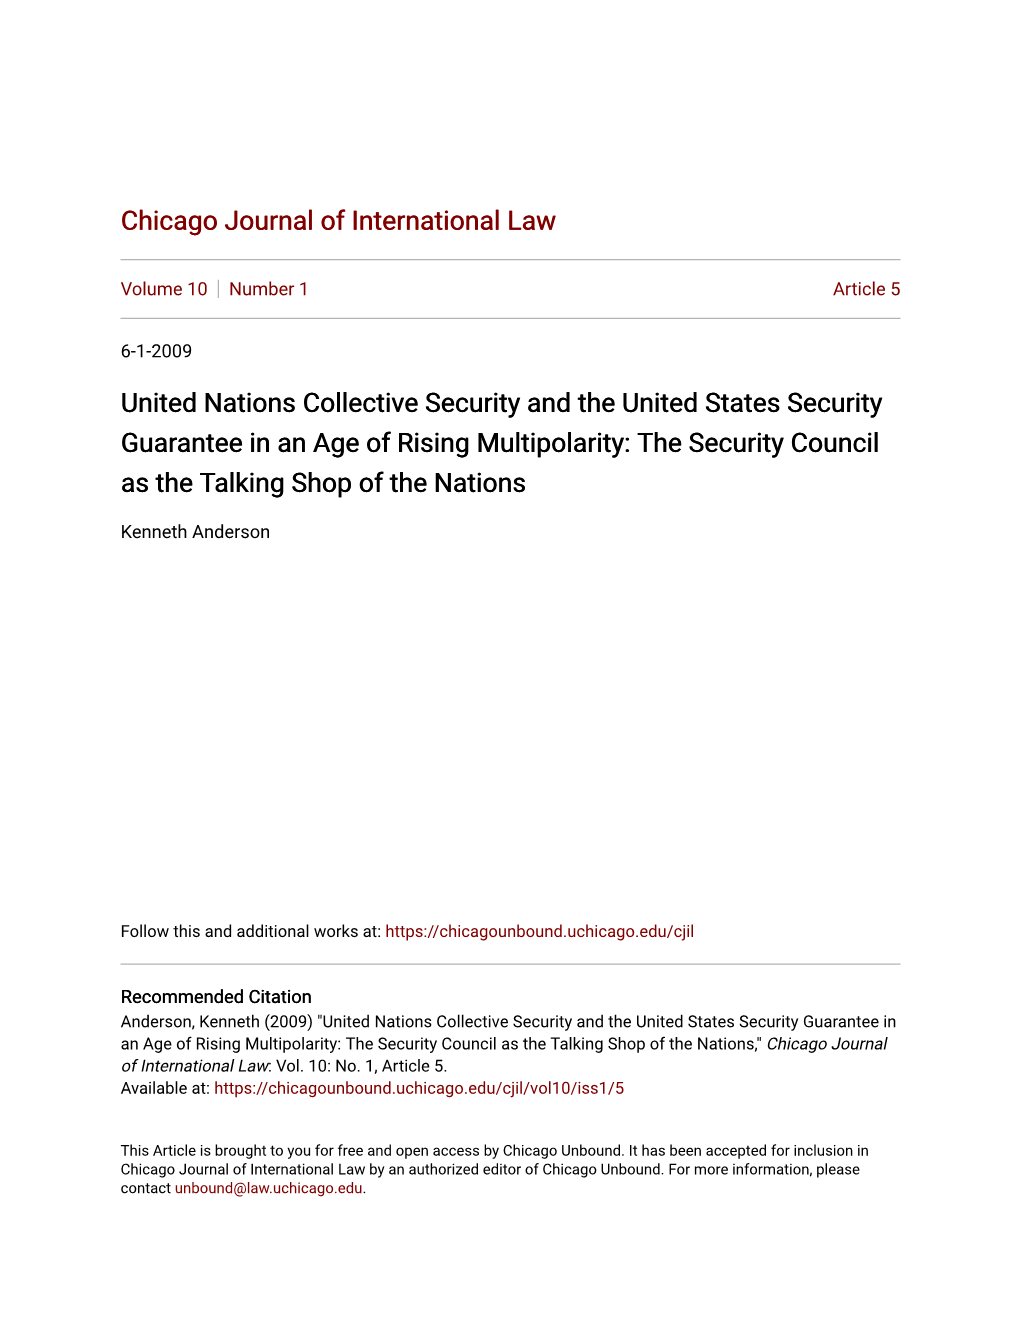 United Nations Collective Security and the United States Security